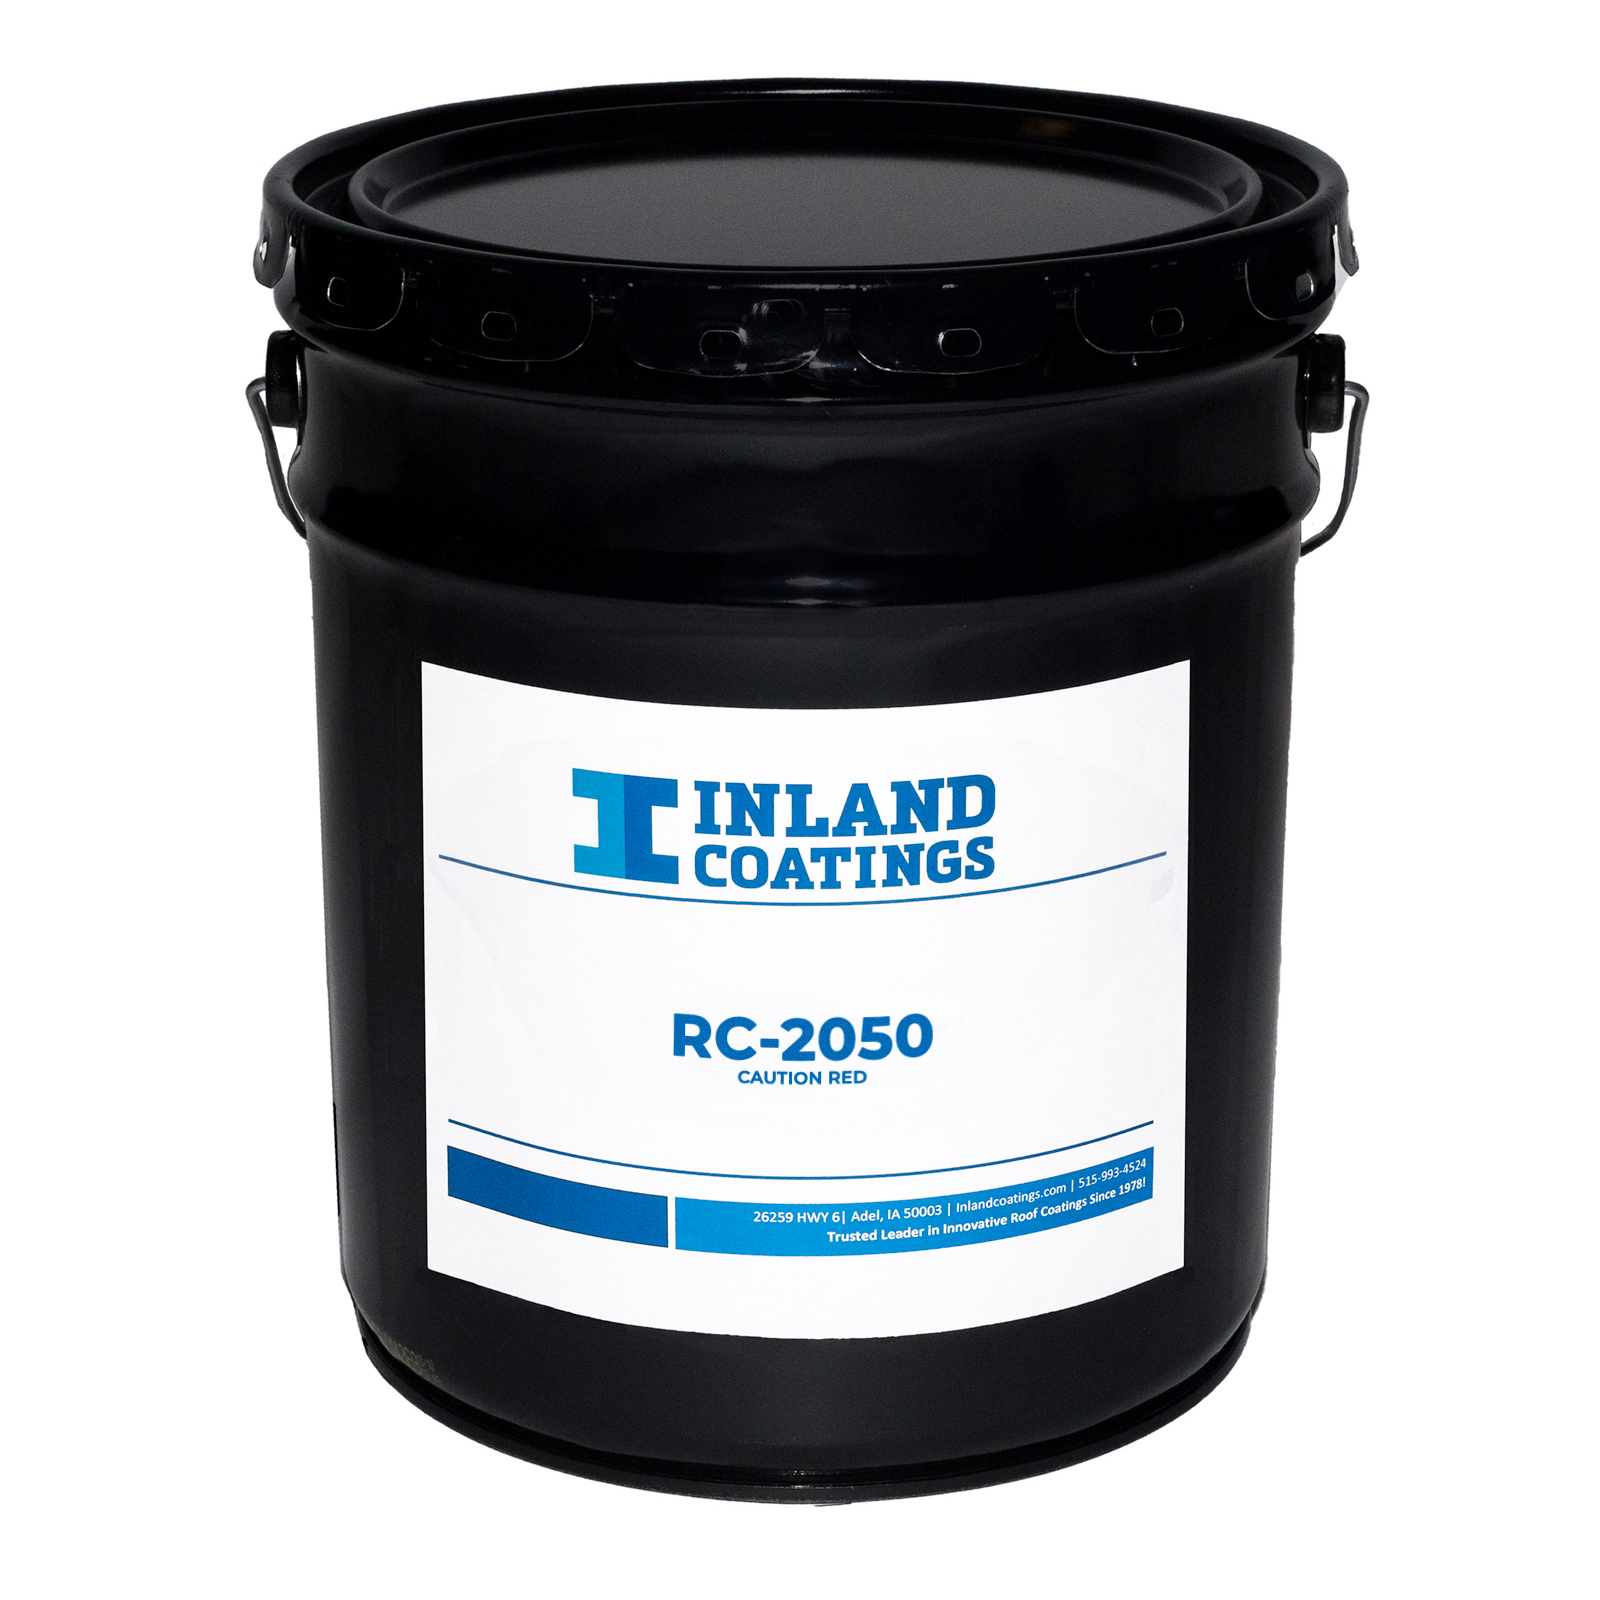 A bucket of Inland's RC-2050 Caution Red Coating